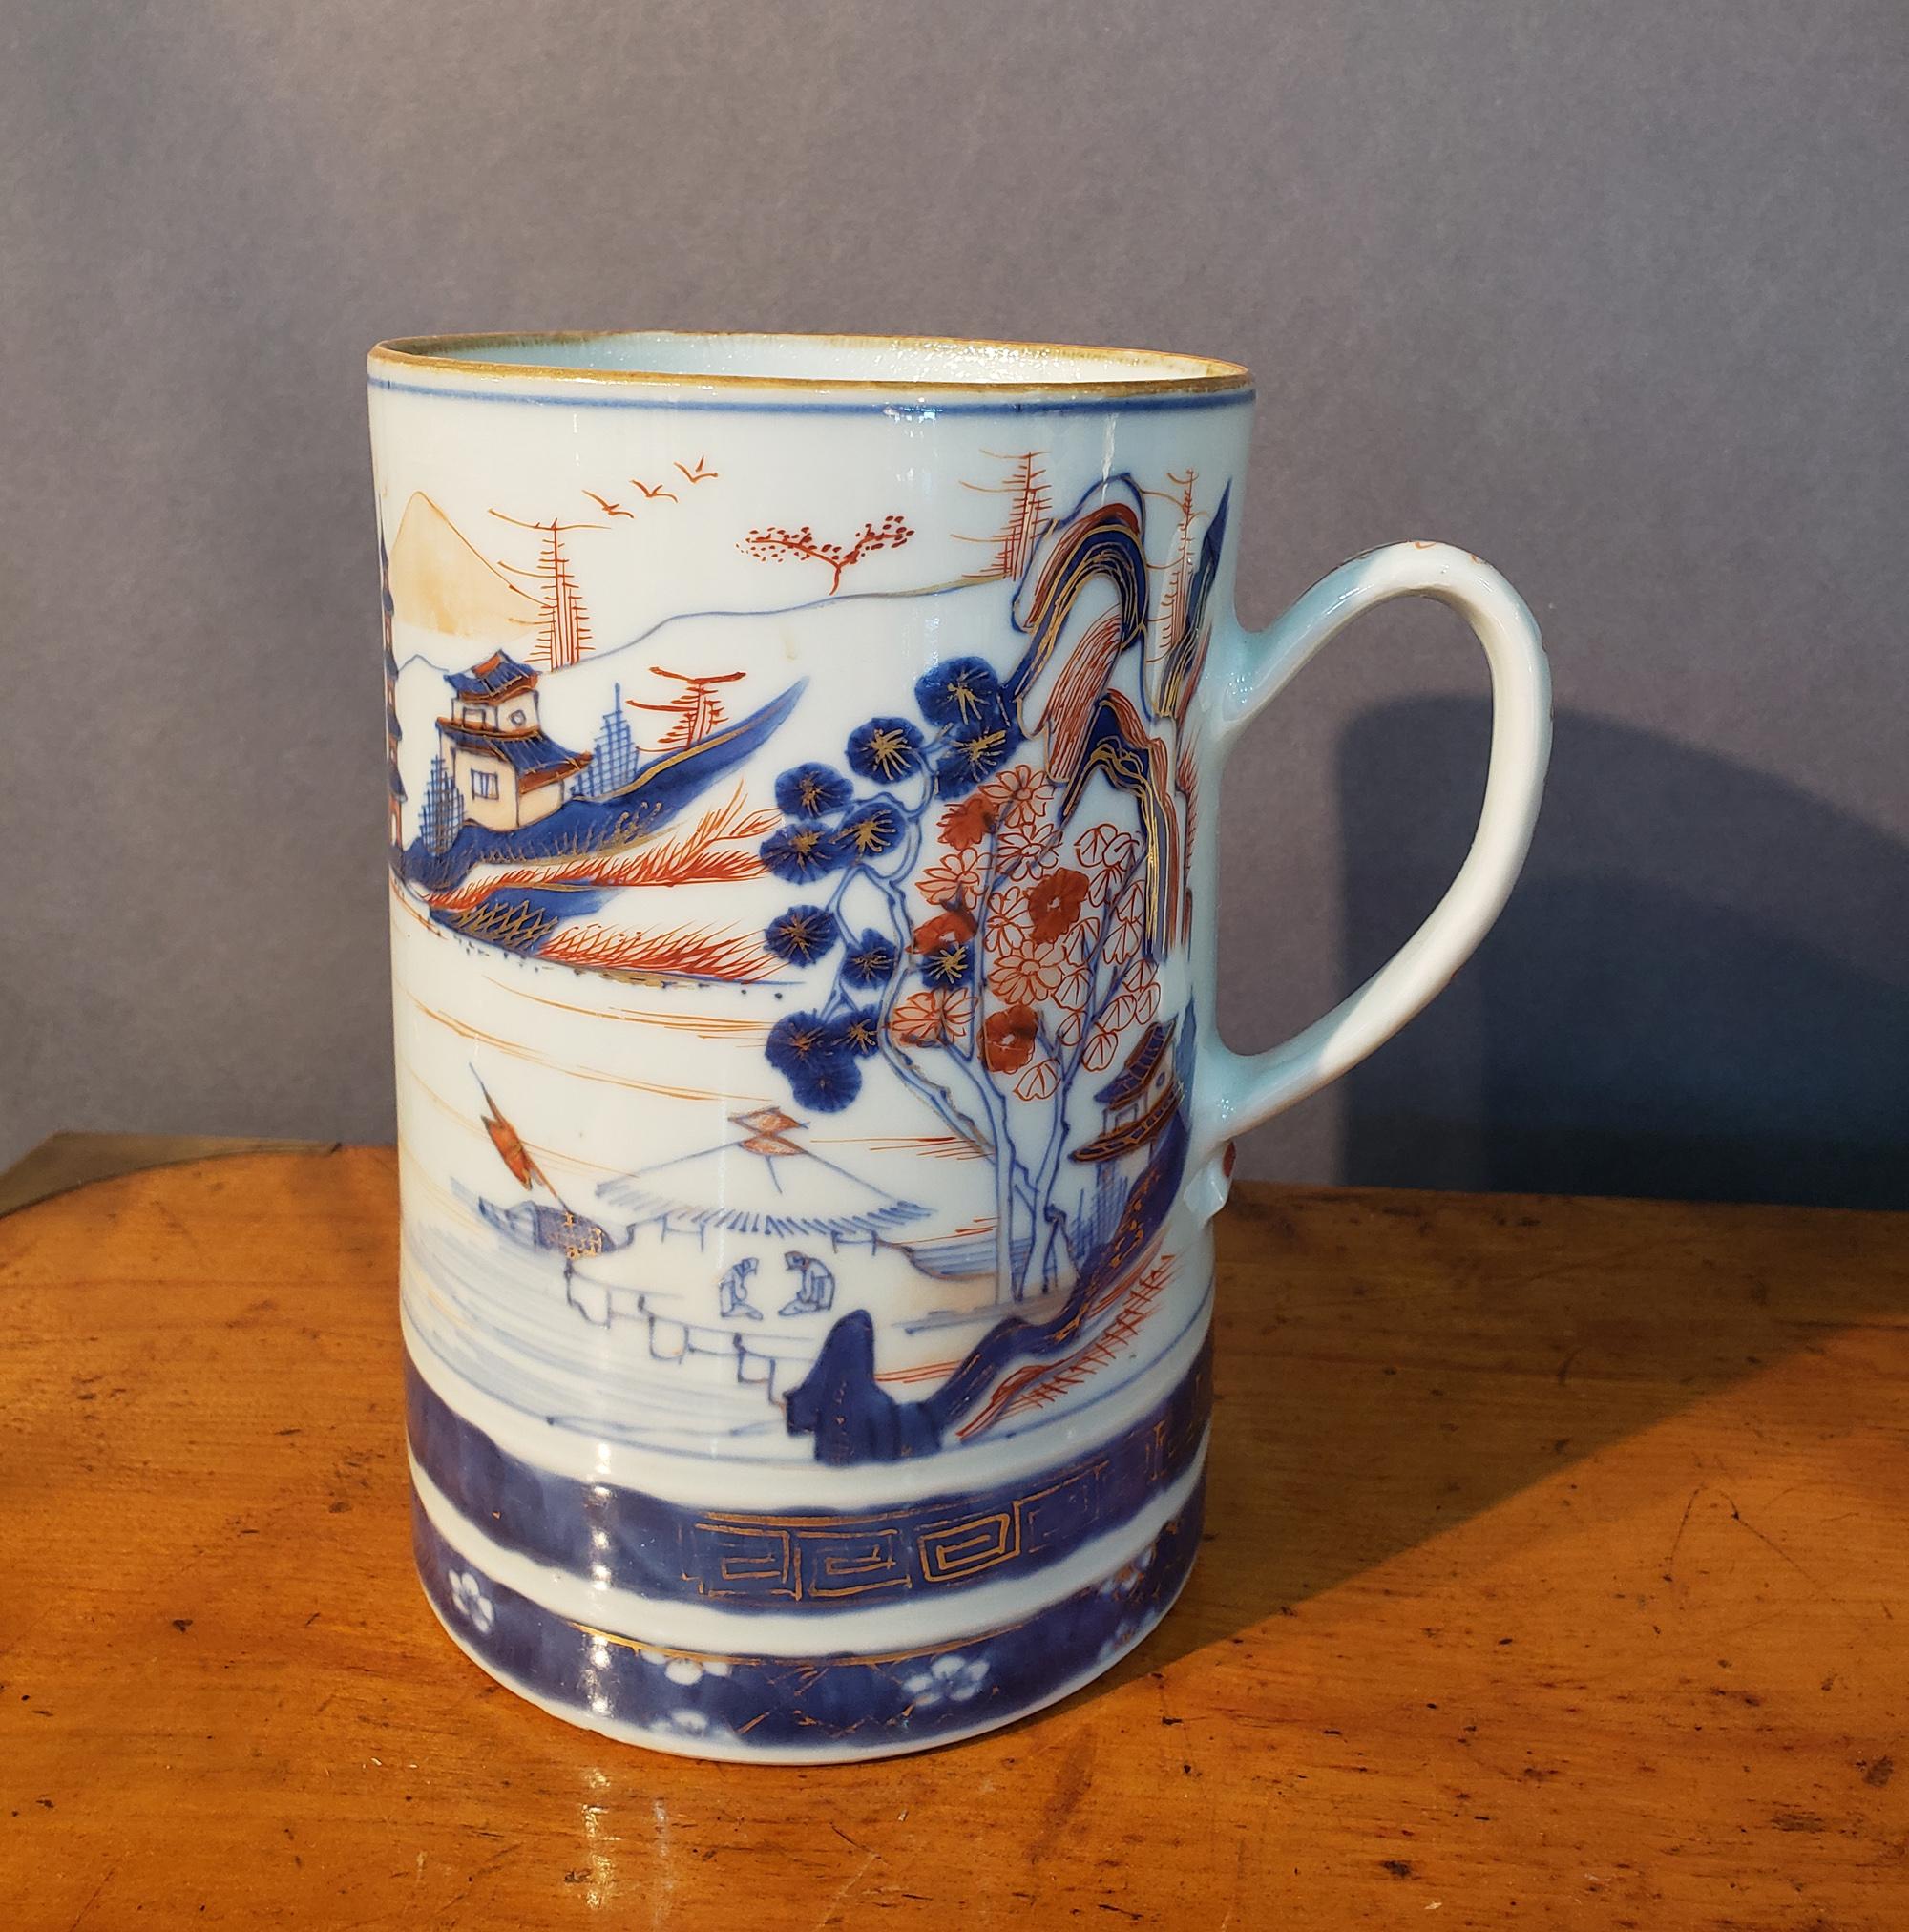 Chinese Export Porcelain Imari Tankard,
Circa 1740

The Chinese Export porcelain tankard depicts a small male figure standing in the foreground dwarfed before rising mountains. A pagoda can be seen in the background. On the other side as part of